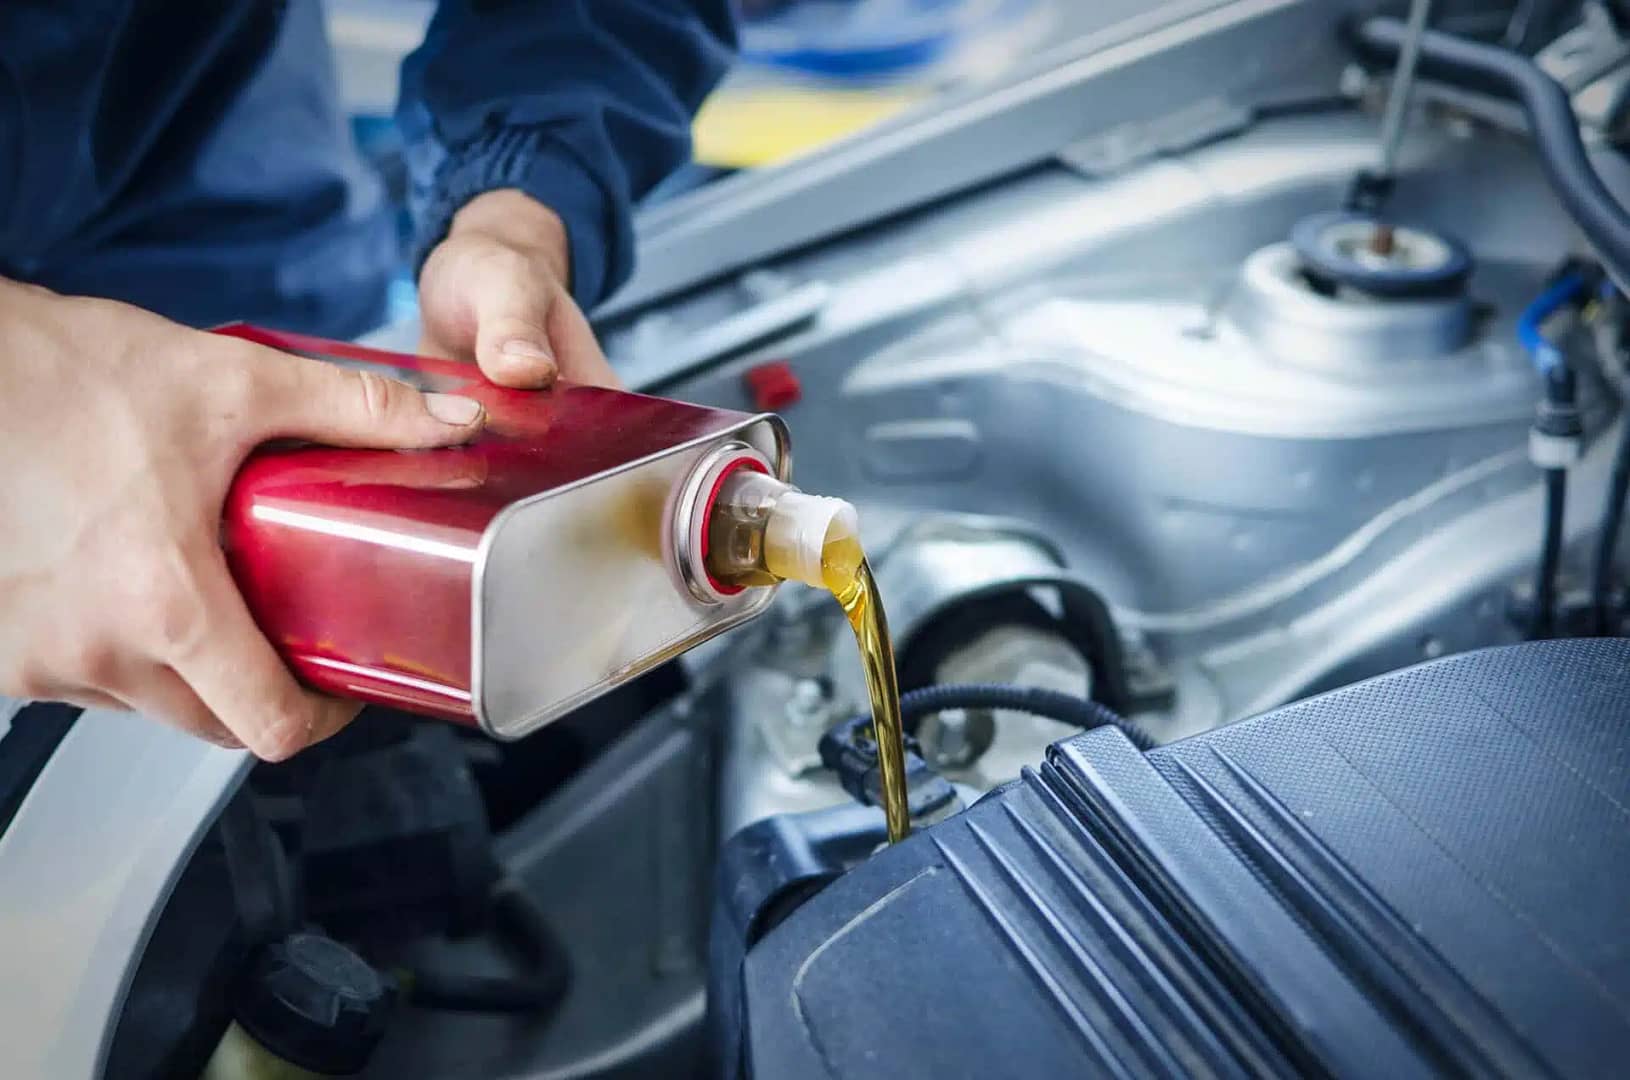 A mechanic pouring oil from a red container into a car engine, focusing on maintaining or servicing the vehicle in a garage setting.